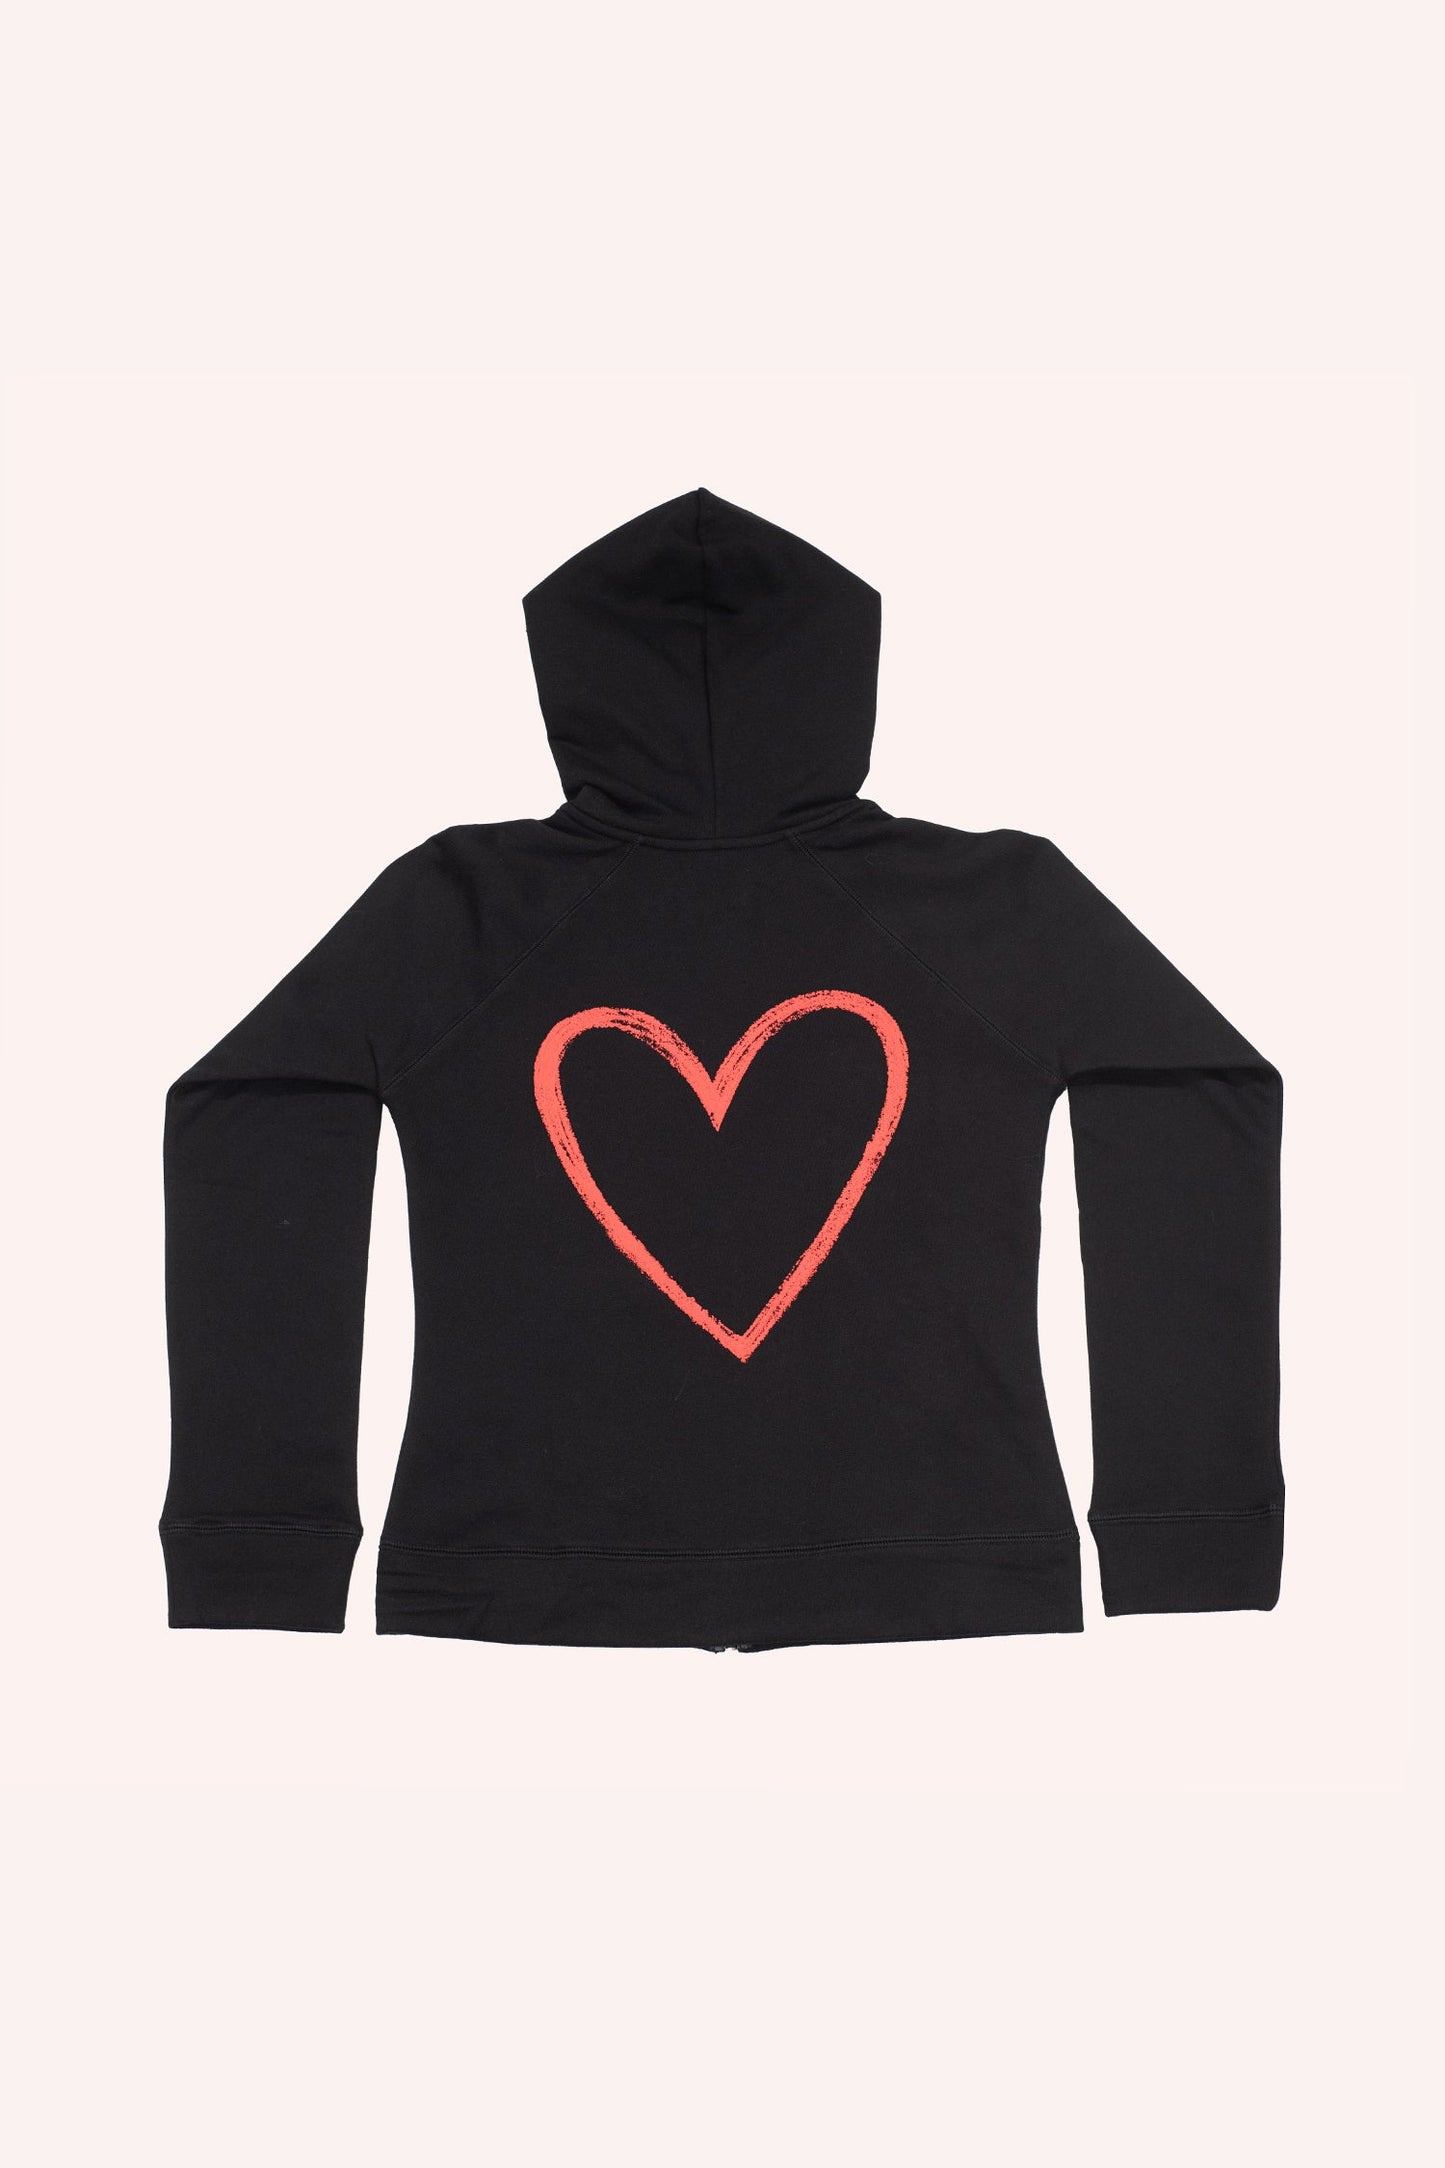 Anna Sui Heart Hoodie Black, Long sleeves, large red heart across back